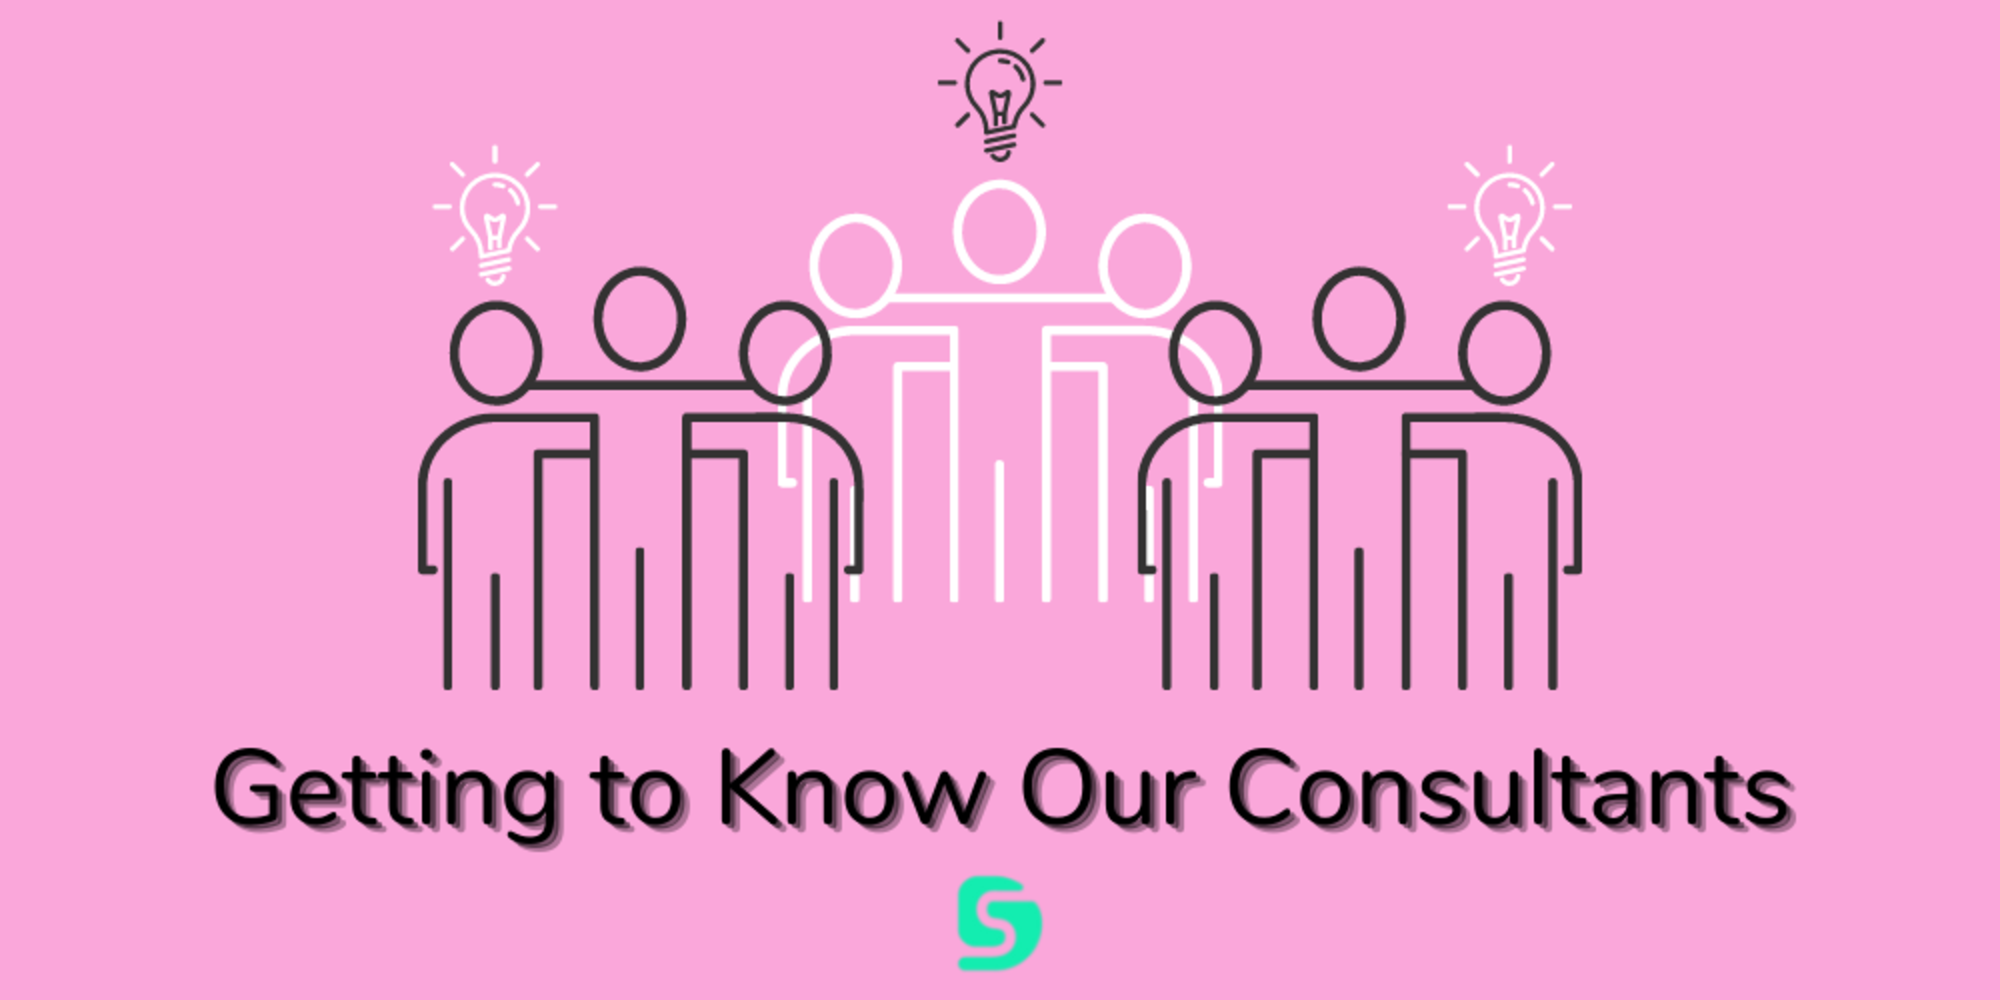 Getting To Know Our Consultants   10 Questions Over 10 Weeks (13)